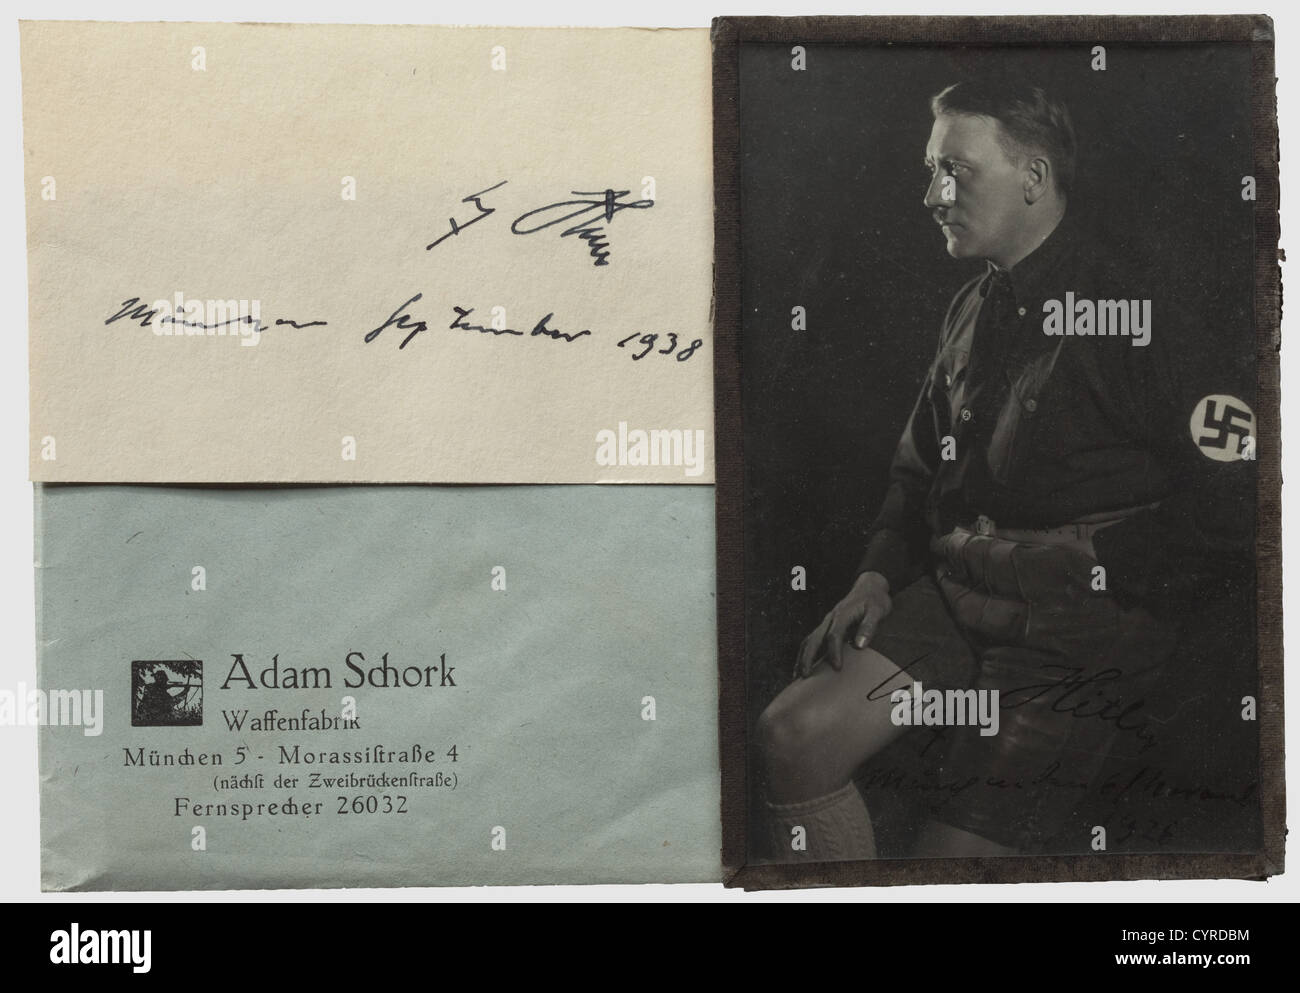 Adolf Hitler - Adam Schork, A signed portrait photograph from 1926 Early photograph by Hoffmann, Hitler in lederhosen, signed at the lower edge 'Adolf Hitler - München den 6/November 1926', a business card of Adam Schork on the reverse. Also another autograph 'Adolf Hitler - München September 1938' on a greeting card in a 'Wechselrahmen für Ansichtskarten. Hoch und quer zum Hängen' (Clip-on picture frame for picture postcards. To be put up vertical and horizontal) with galzed front and accordingly imprinted backside. The frame wrapped up in Schork's company pap, Stock Photo